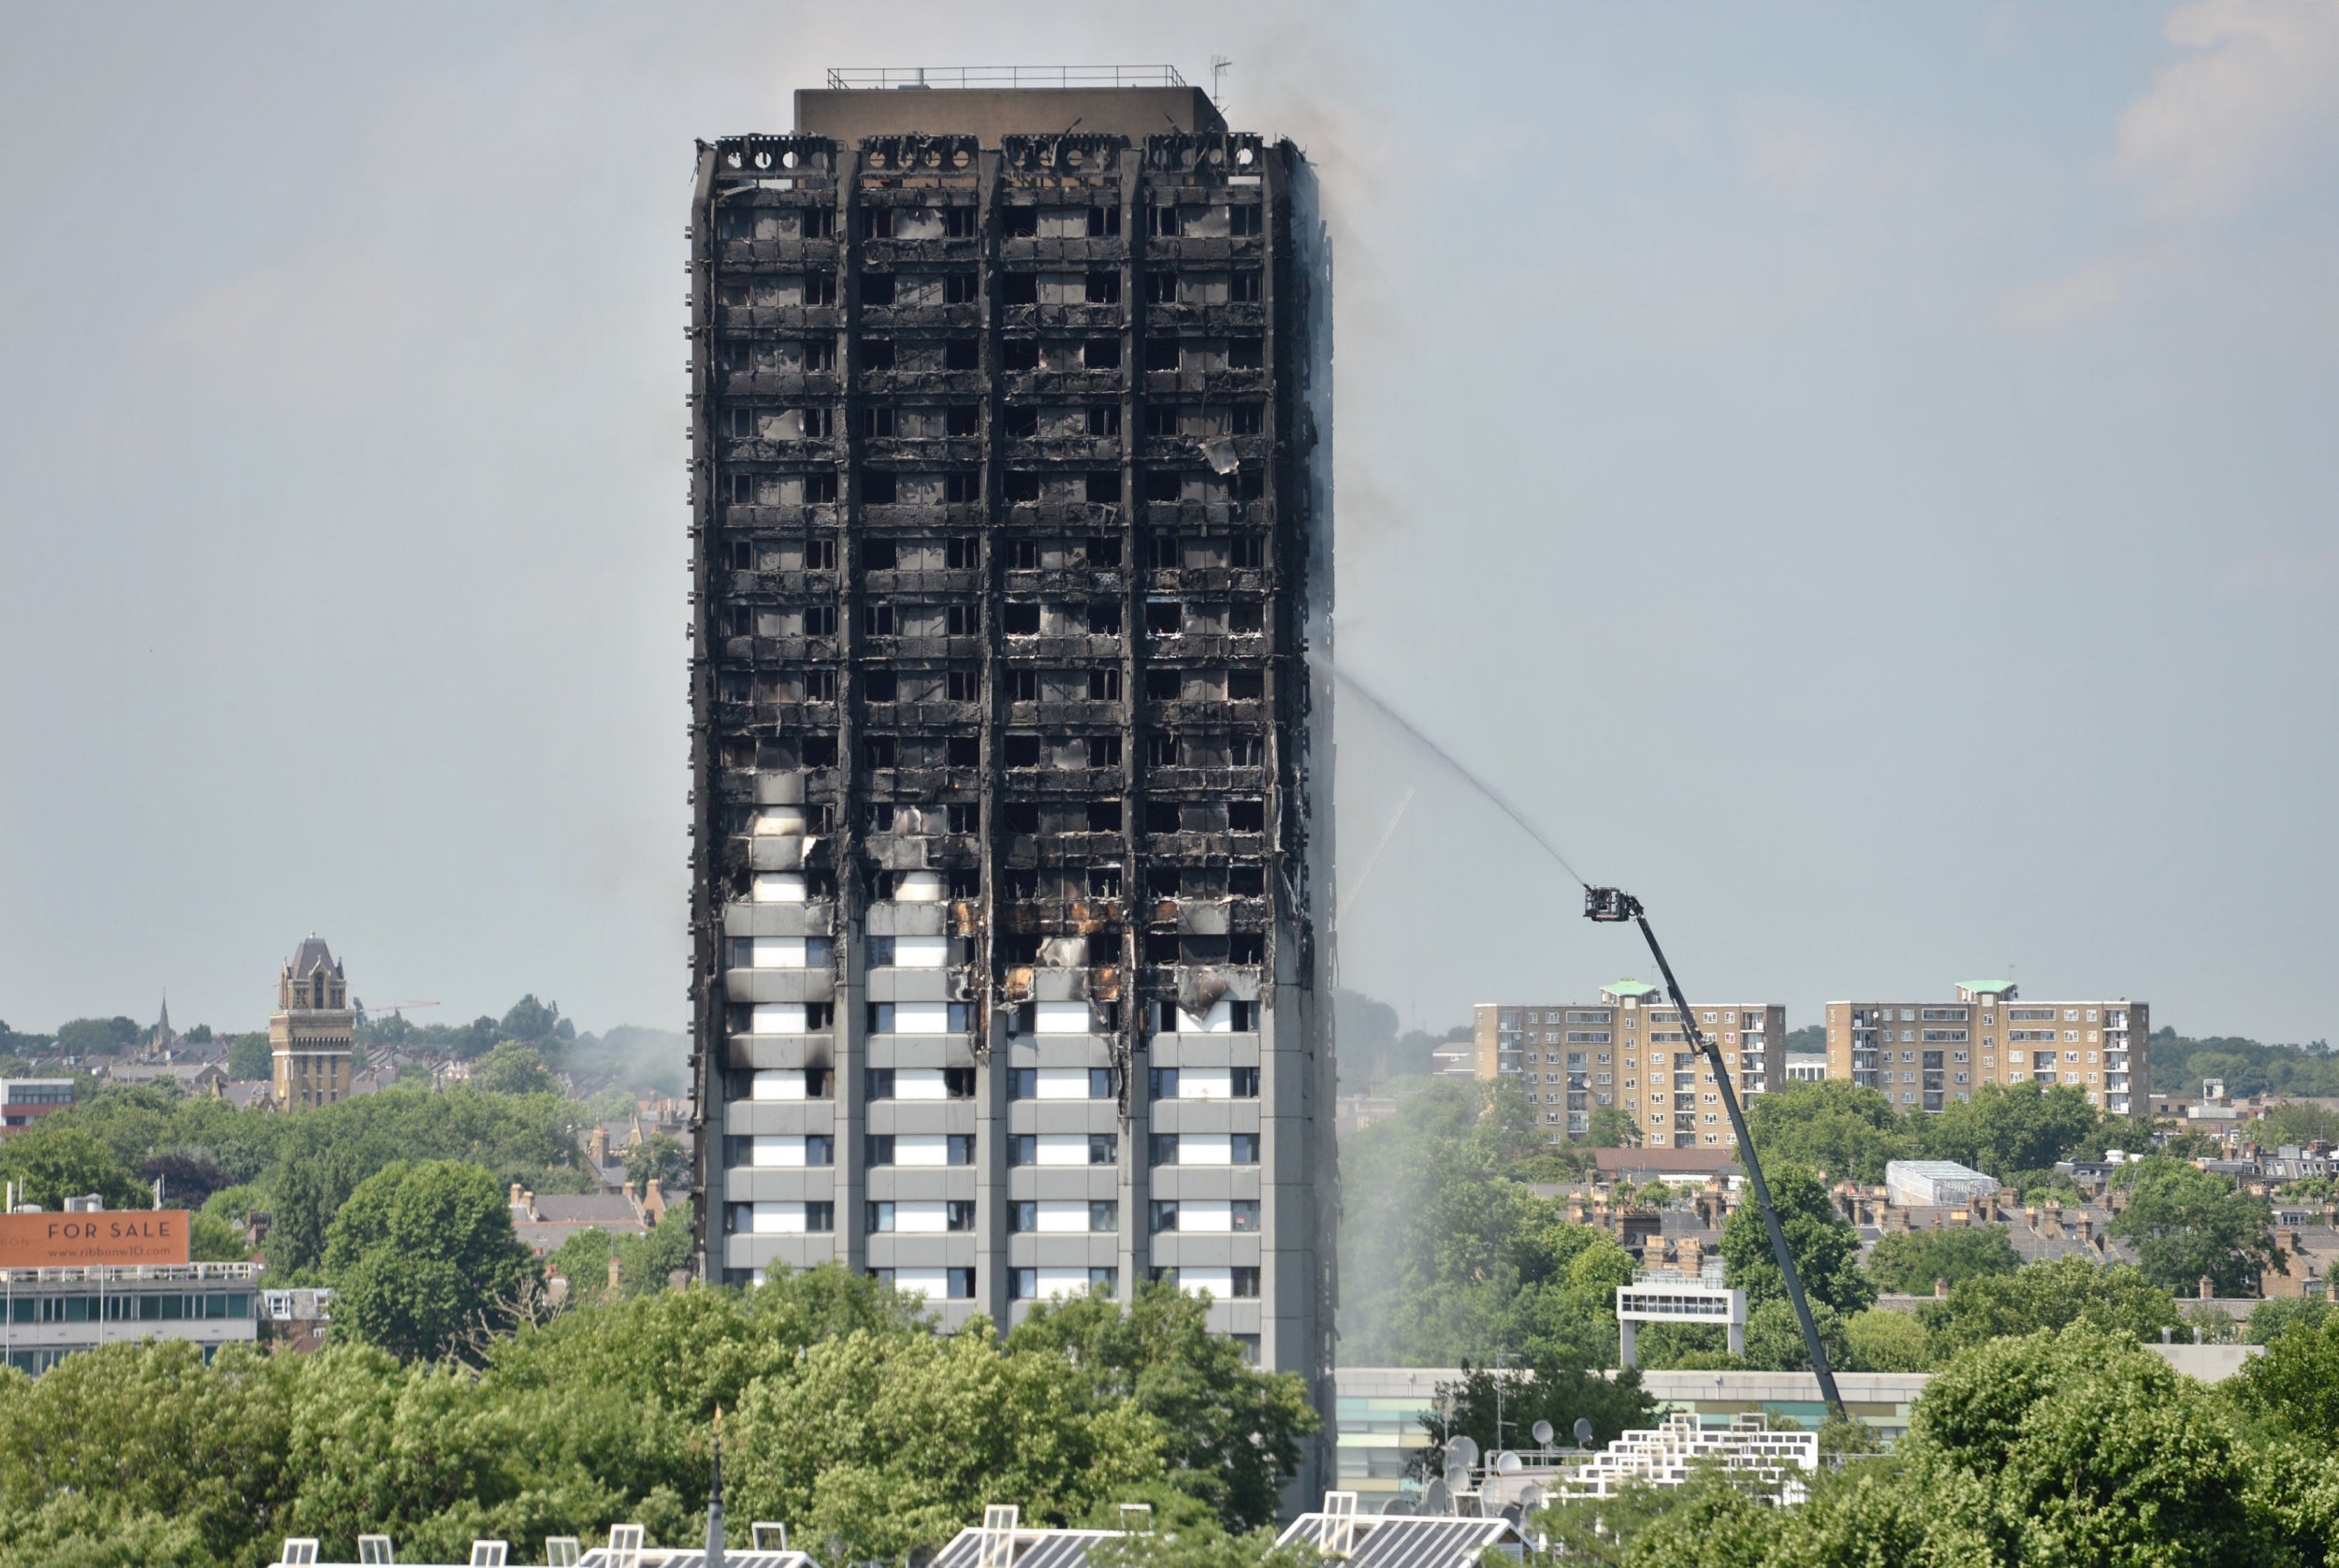 Of 450 high-rise residential buildings in England found to have the combustible cladding, 315 are yet to undergo works to remove the material